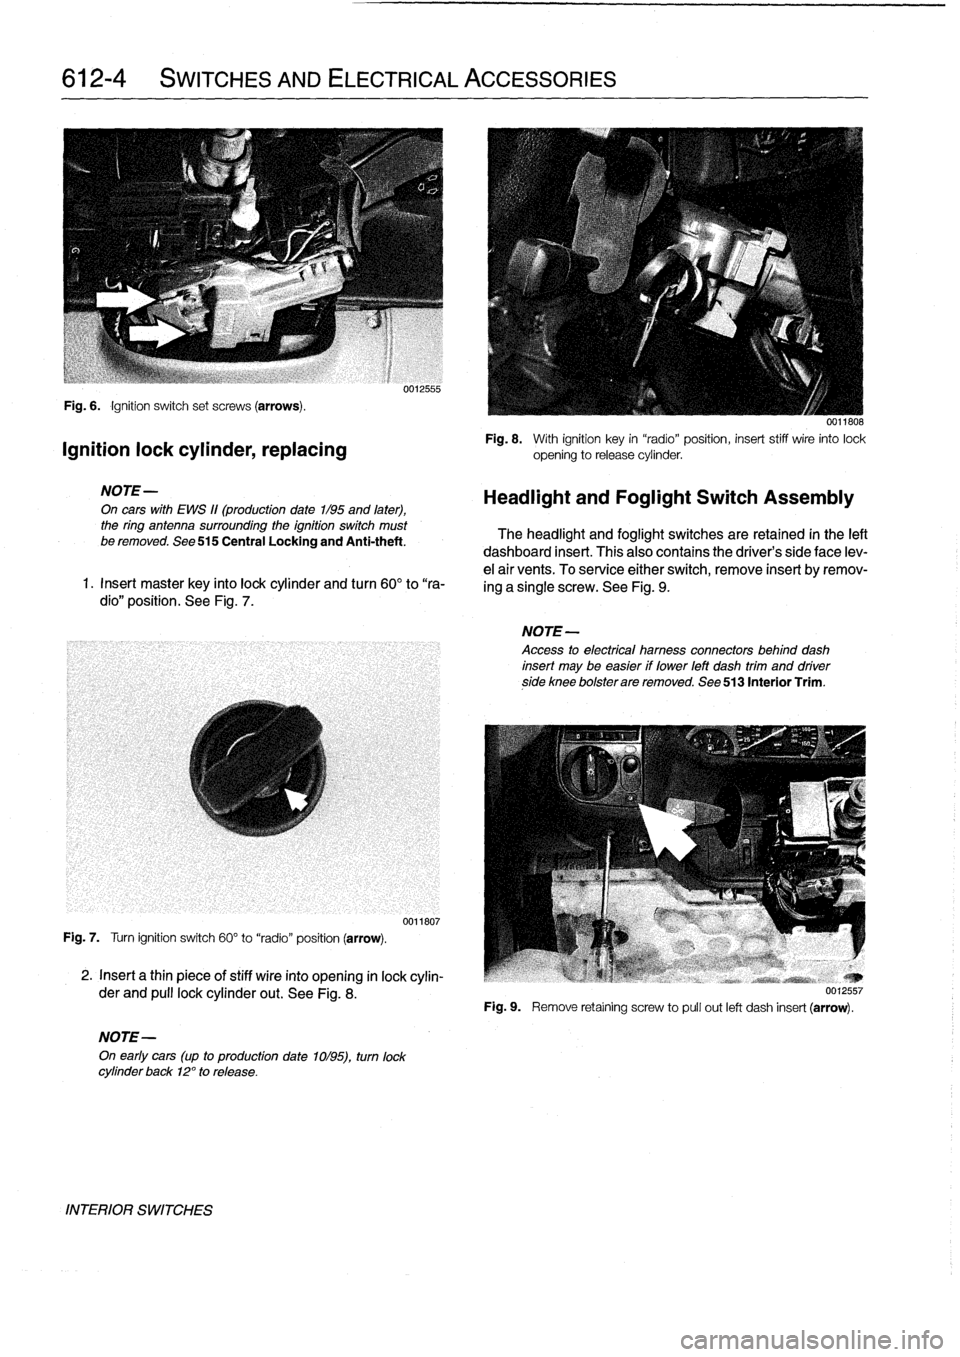 BMW 318i 1997 E36 Workshop Manual 
612-4

	

SWITCHES
AND
ELECTRICAL
ACCESSORIES

Fig
.
6
.

	

Ignition
switch
set
screws
(arrows)
.

Ignition
lock
cylinder,
replacing

NOTE-

On
cars
with
EWS
11(production
date
1/95
and
later),
the
